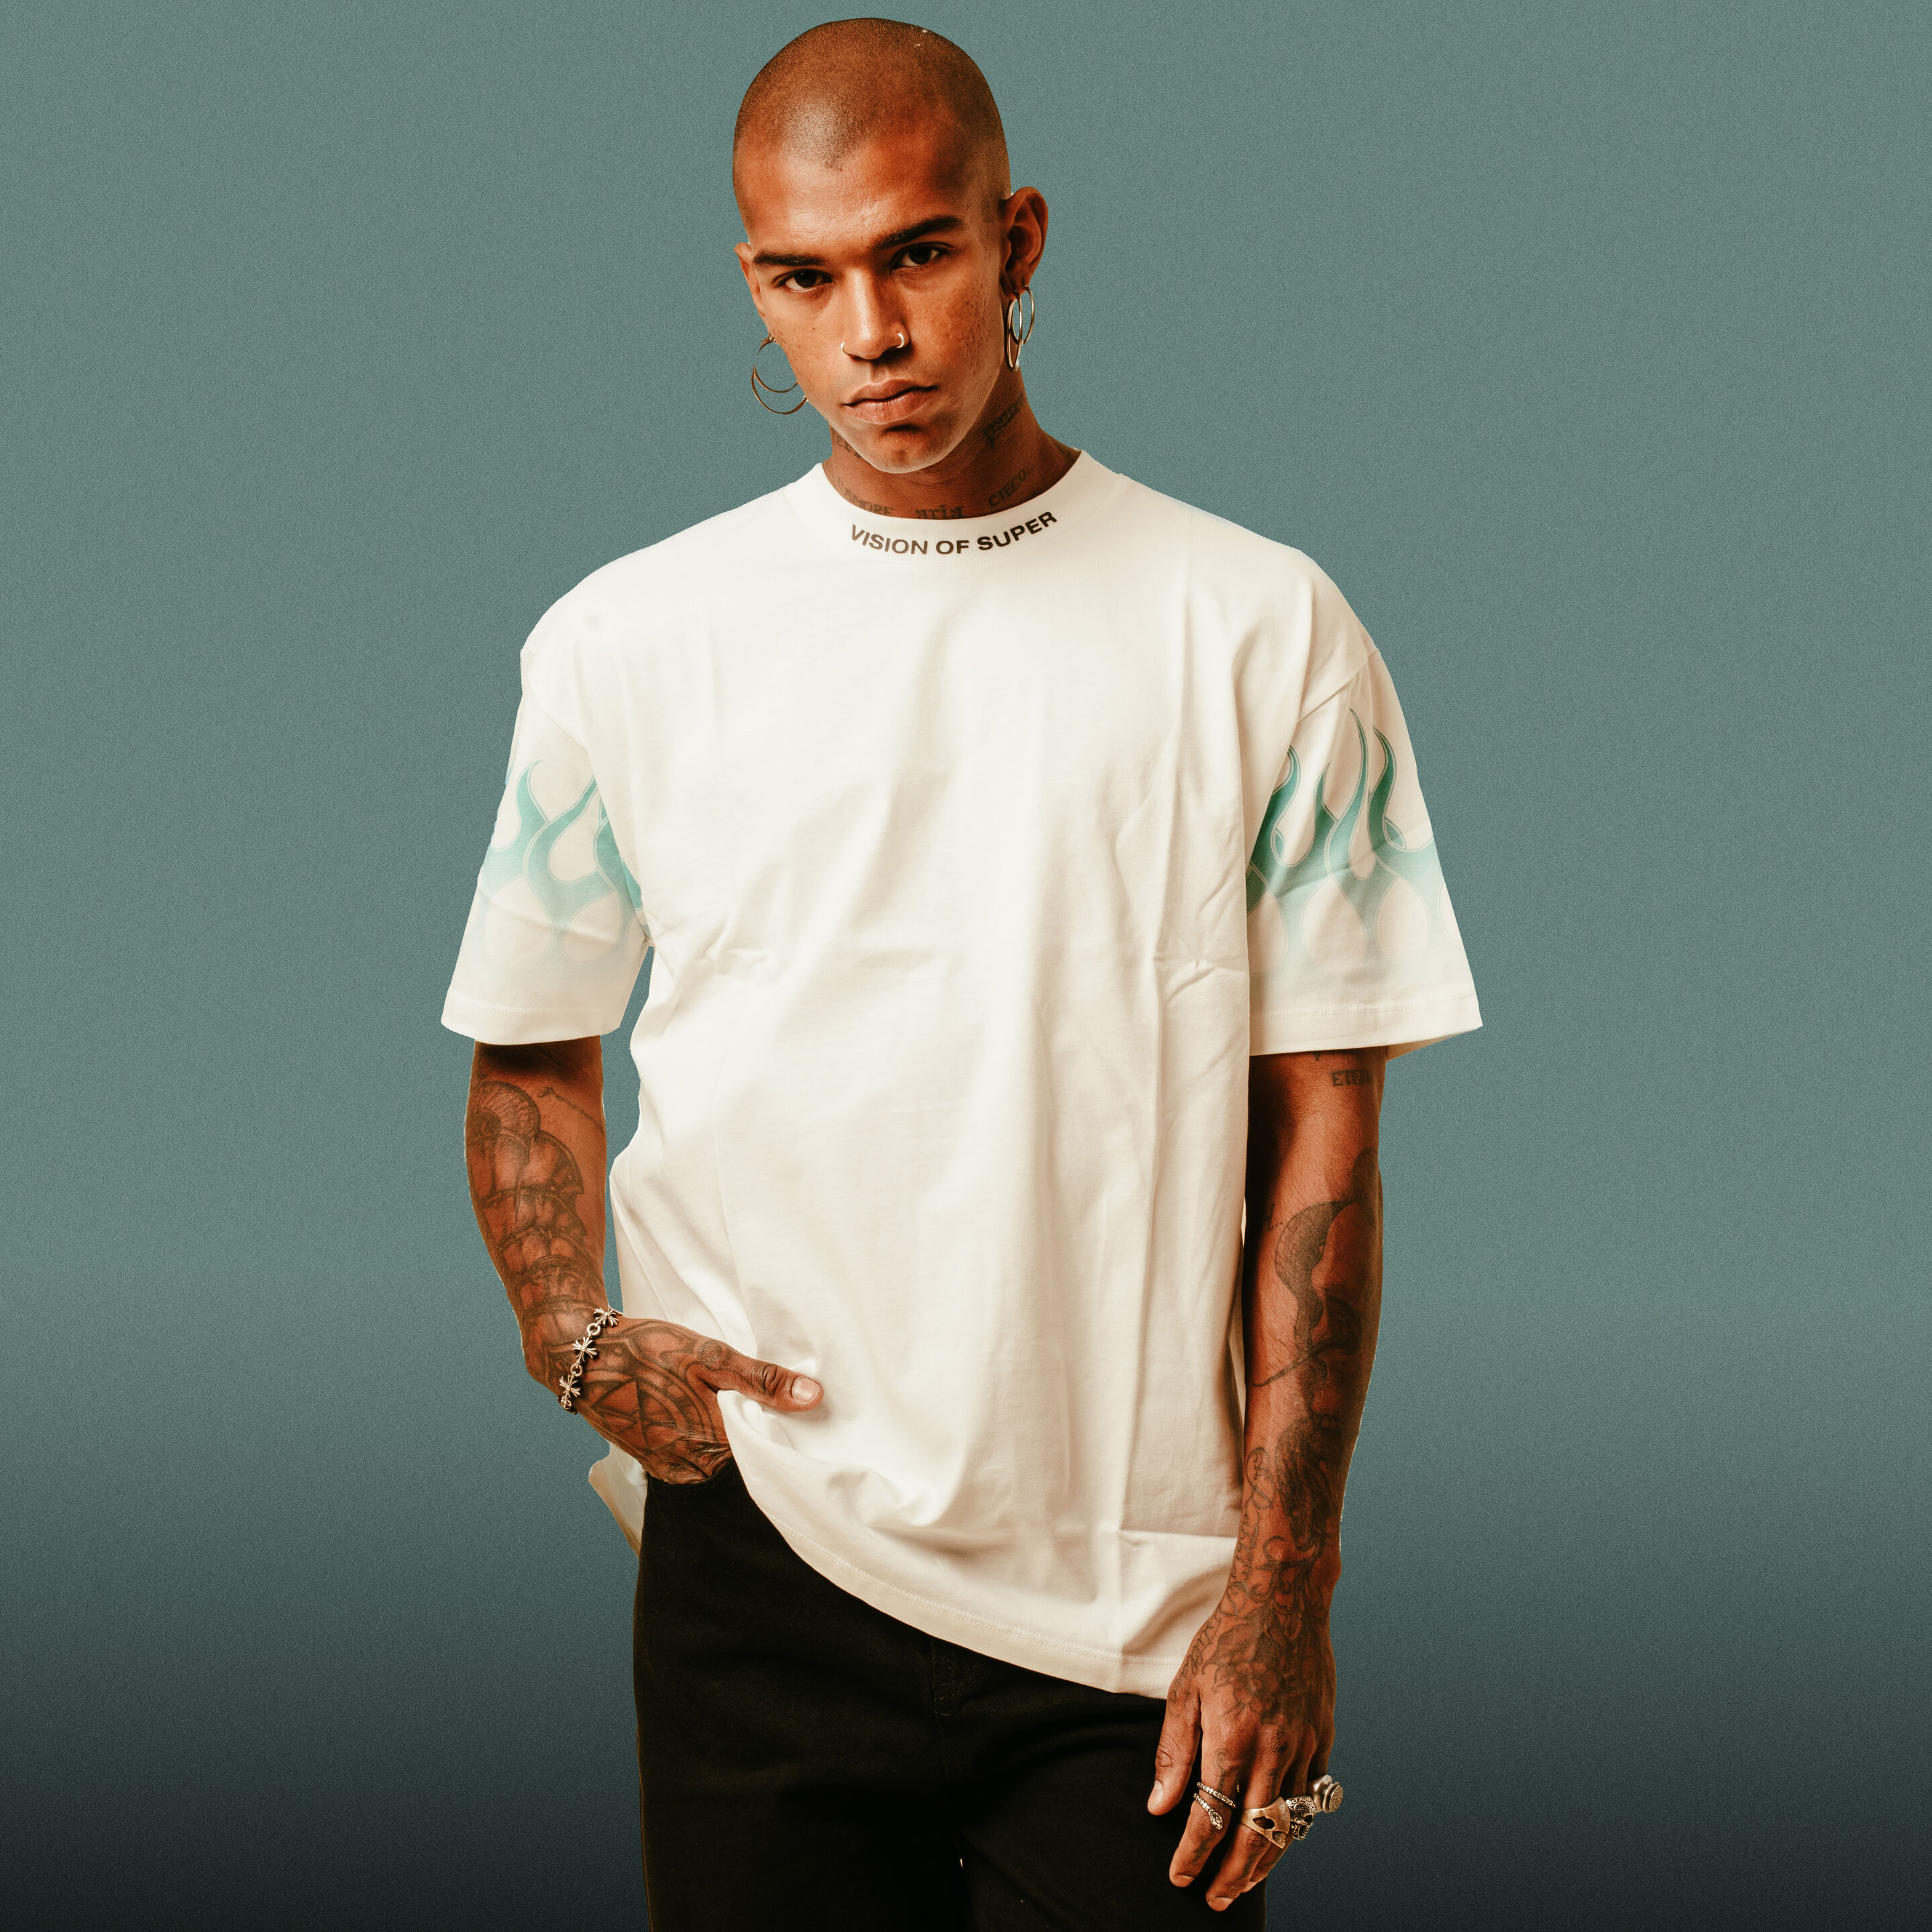 Lacoste Pull-Over Relax Fit Homme , Ethereal/Ethereal, XS 